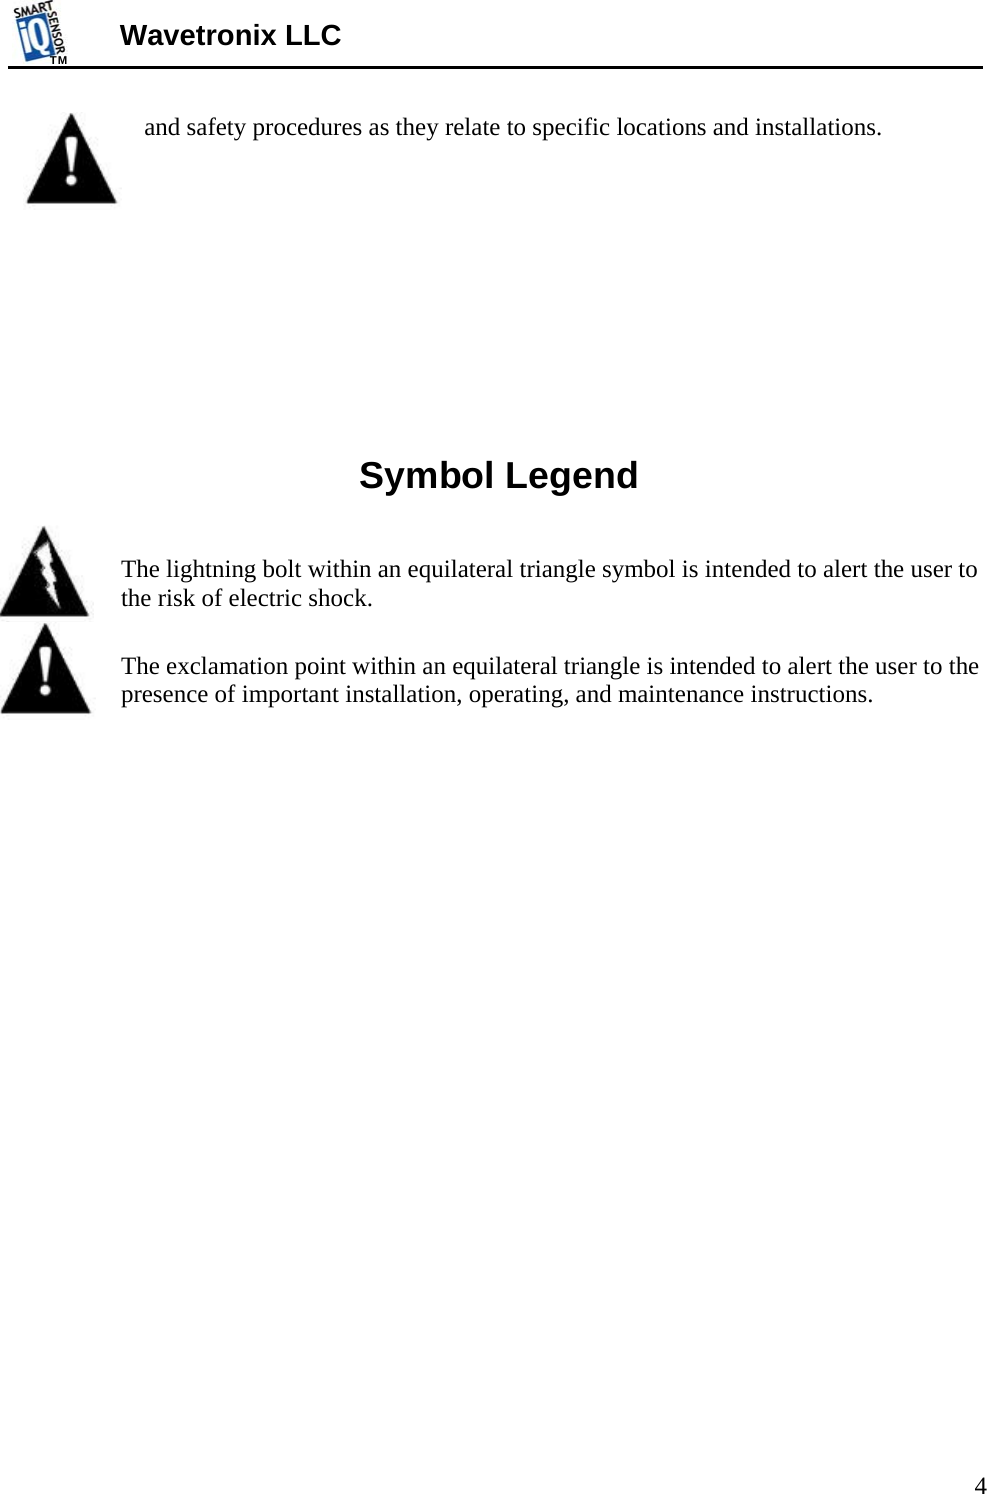 TMTM  4 Wavetronix LLC  and safety procedures as they relate to specific locations and installations.       Symbol Legend    The lightning bolt within an equilateral triangle symbol is intended to alert the user to the risk of electric shock.   The exclamation point within an equilateral triangle is intended to alert the user to the presence of important installation, operating, and maintenance instructions.   